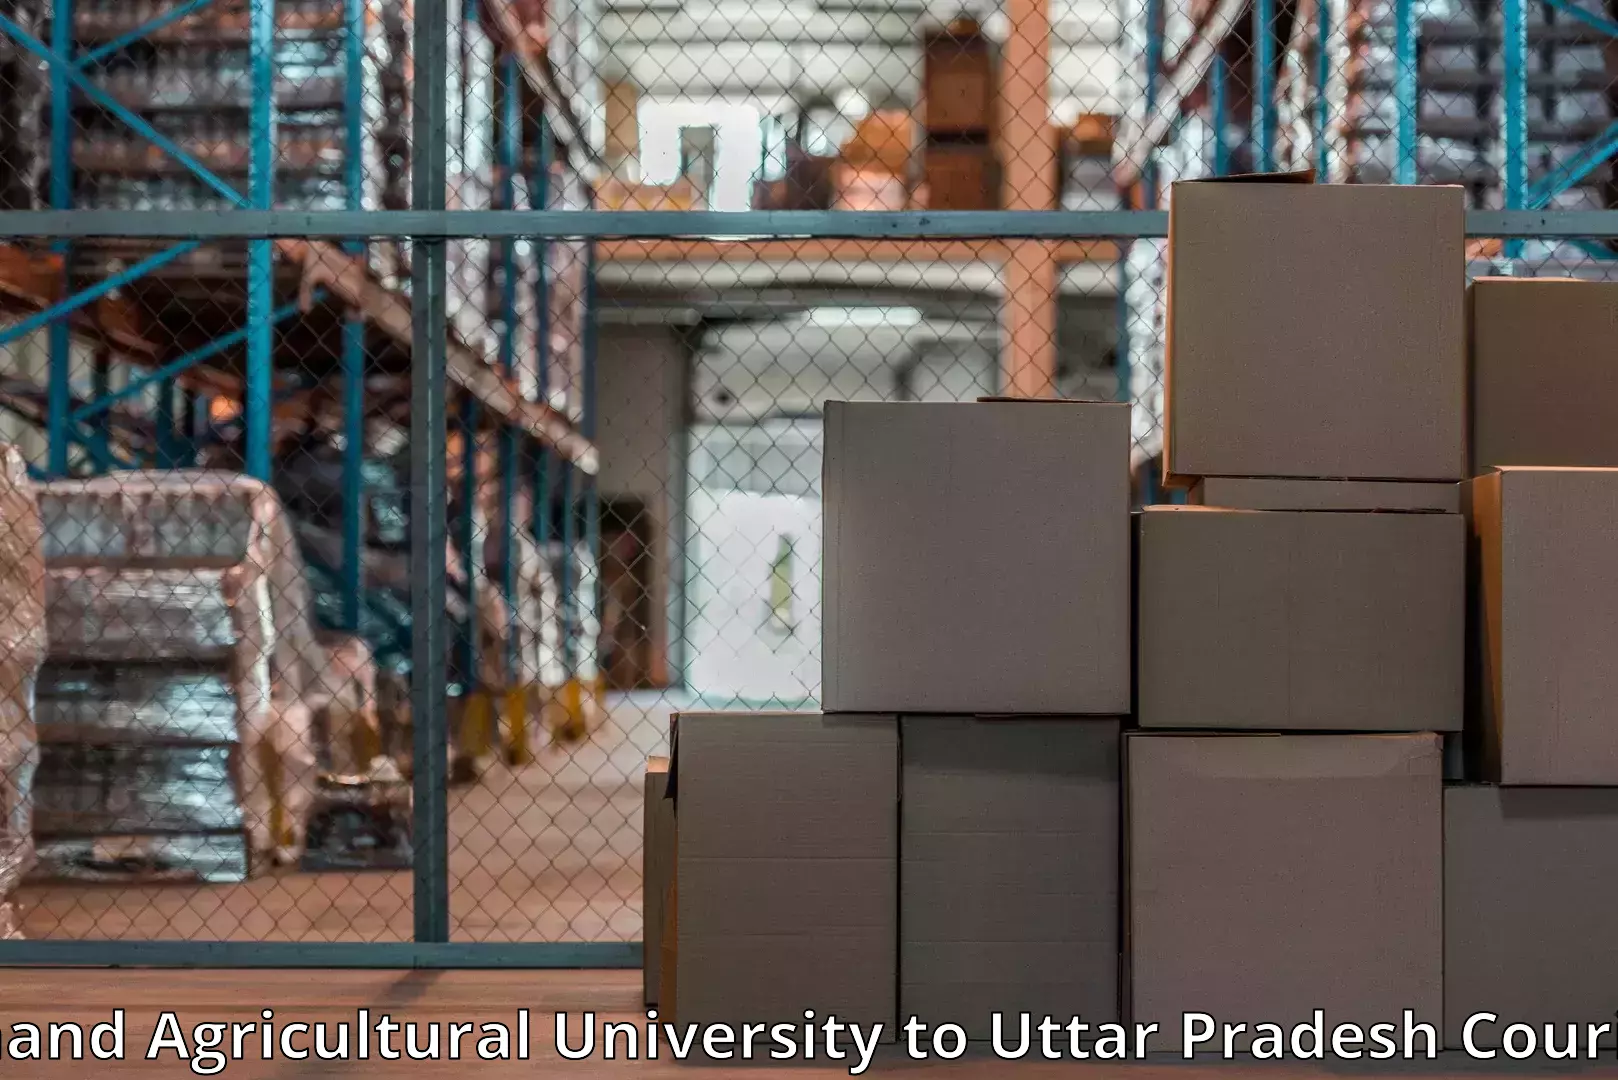 Full-service furniture transport in Anand Agricultural University to Afzalgarh